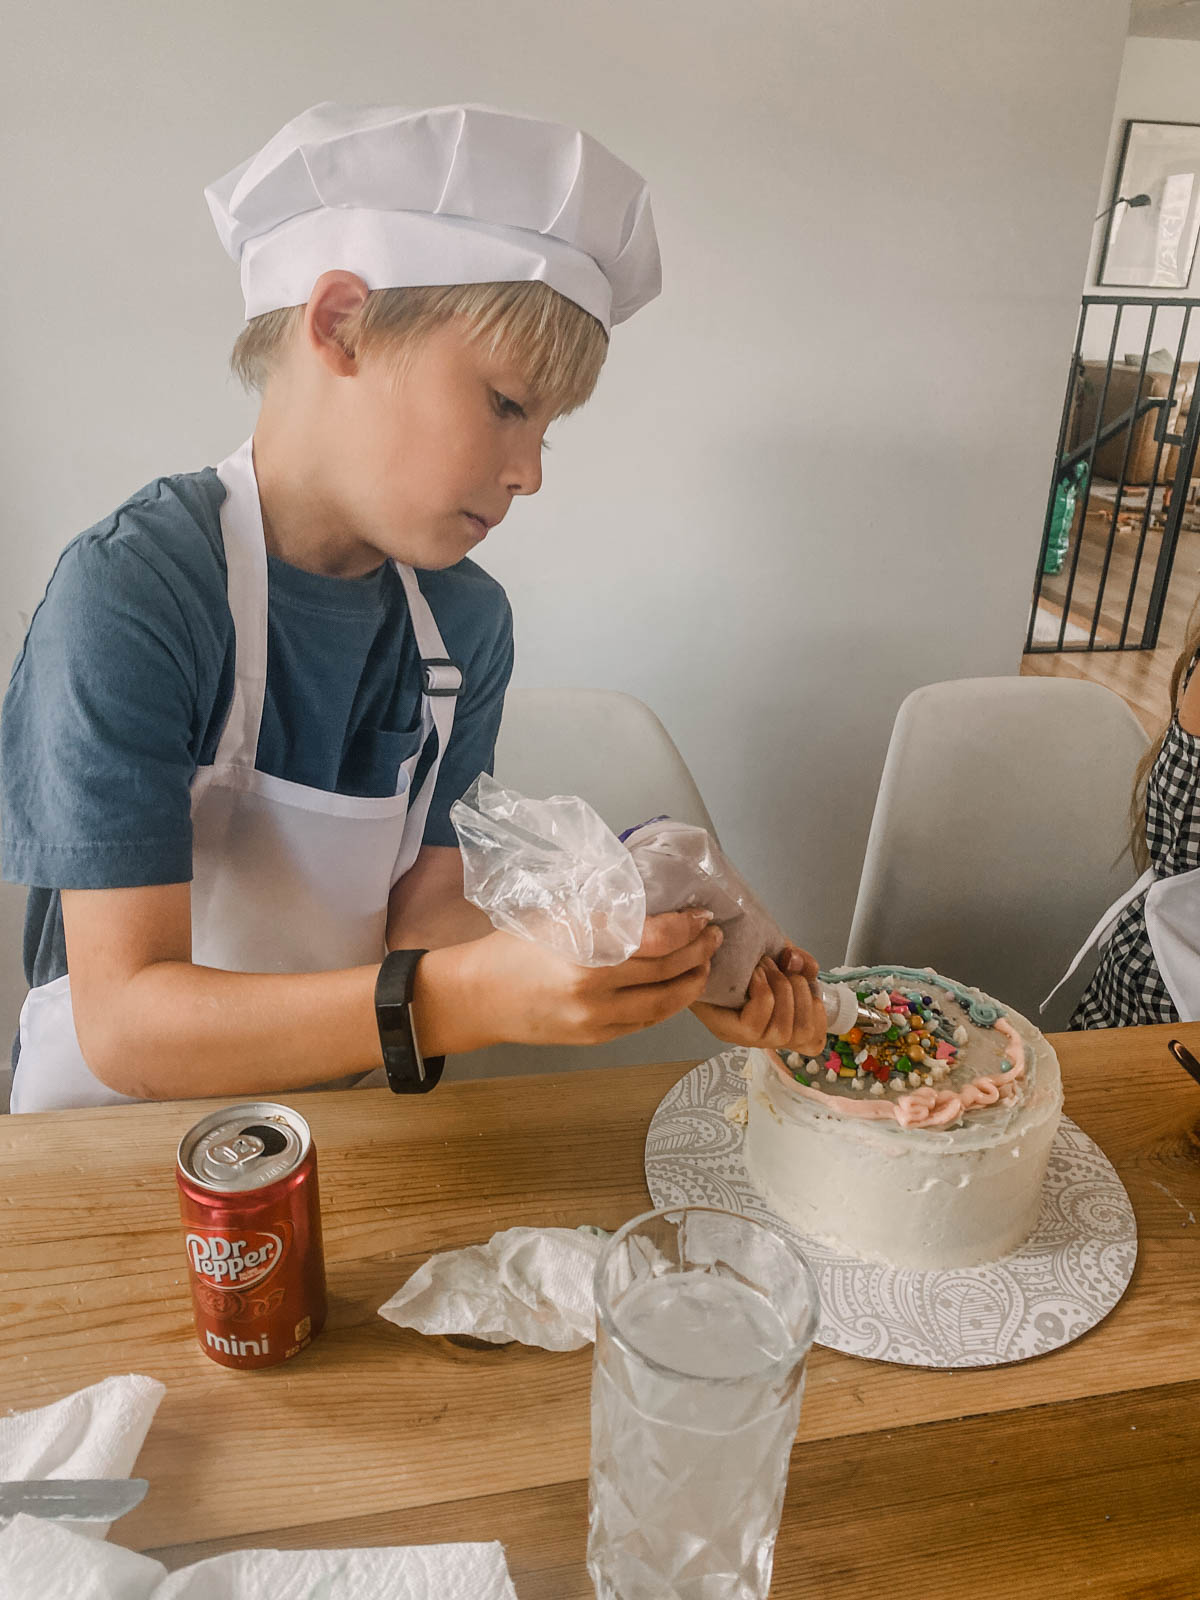 Boy decorating a cake at a cake decorating party wearing an apron and chefs hat